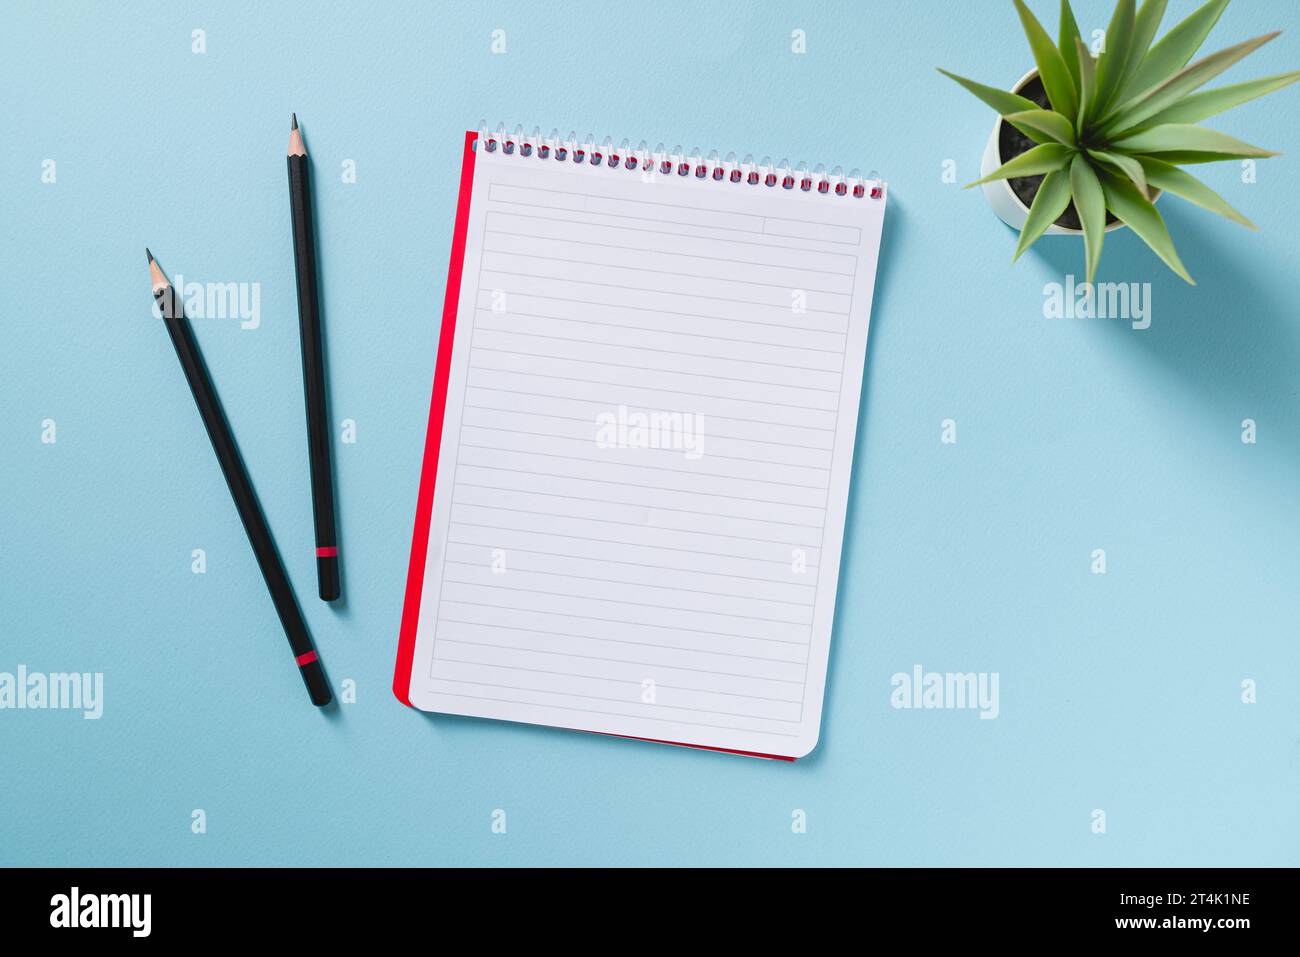 Top view of empty notebook, pen and green plant on blue office desk Stock Photo